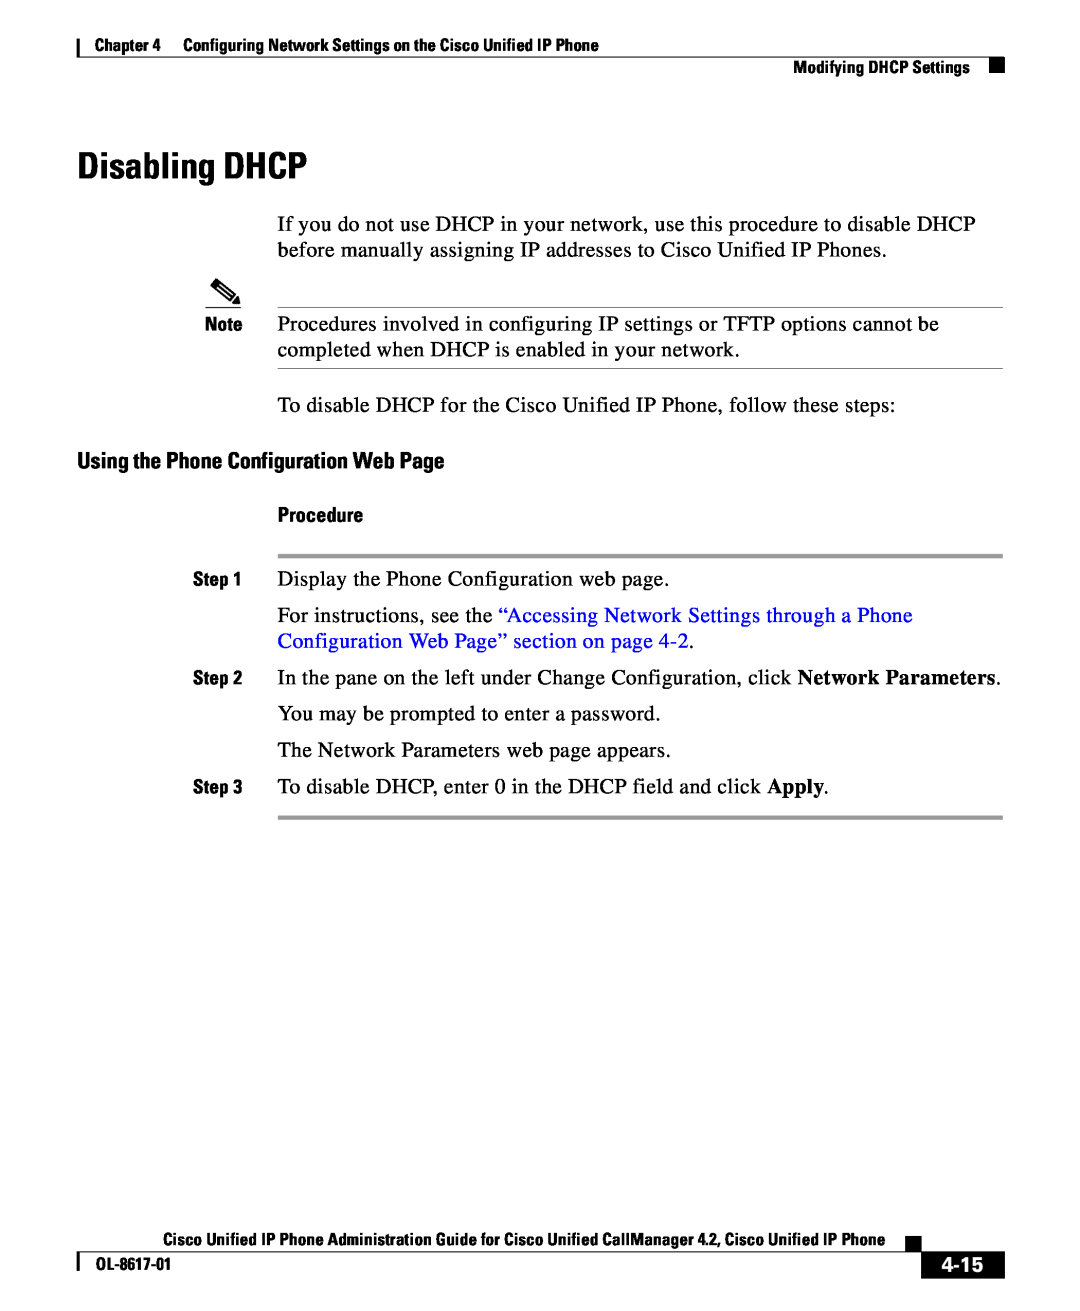 Cisco Systems 4.2 manual Disabling DHCP, 4-15, Using the Phone Configuration Web Page, Procedure 